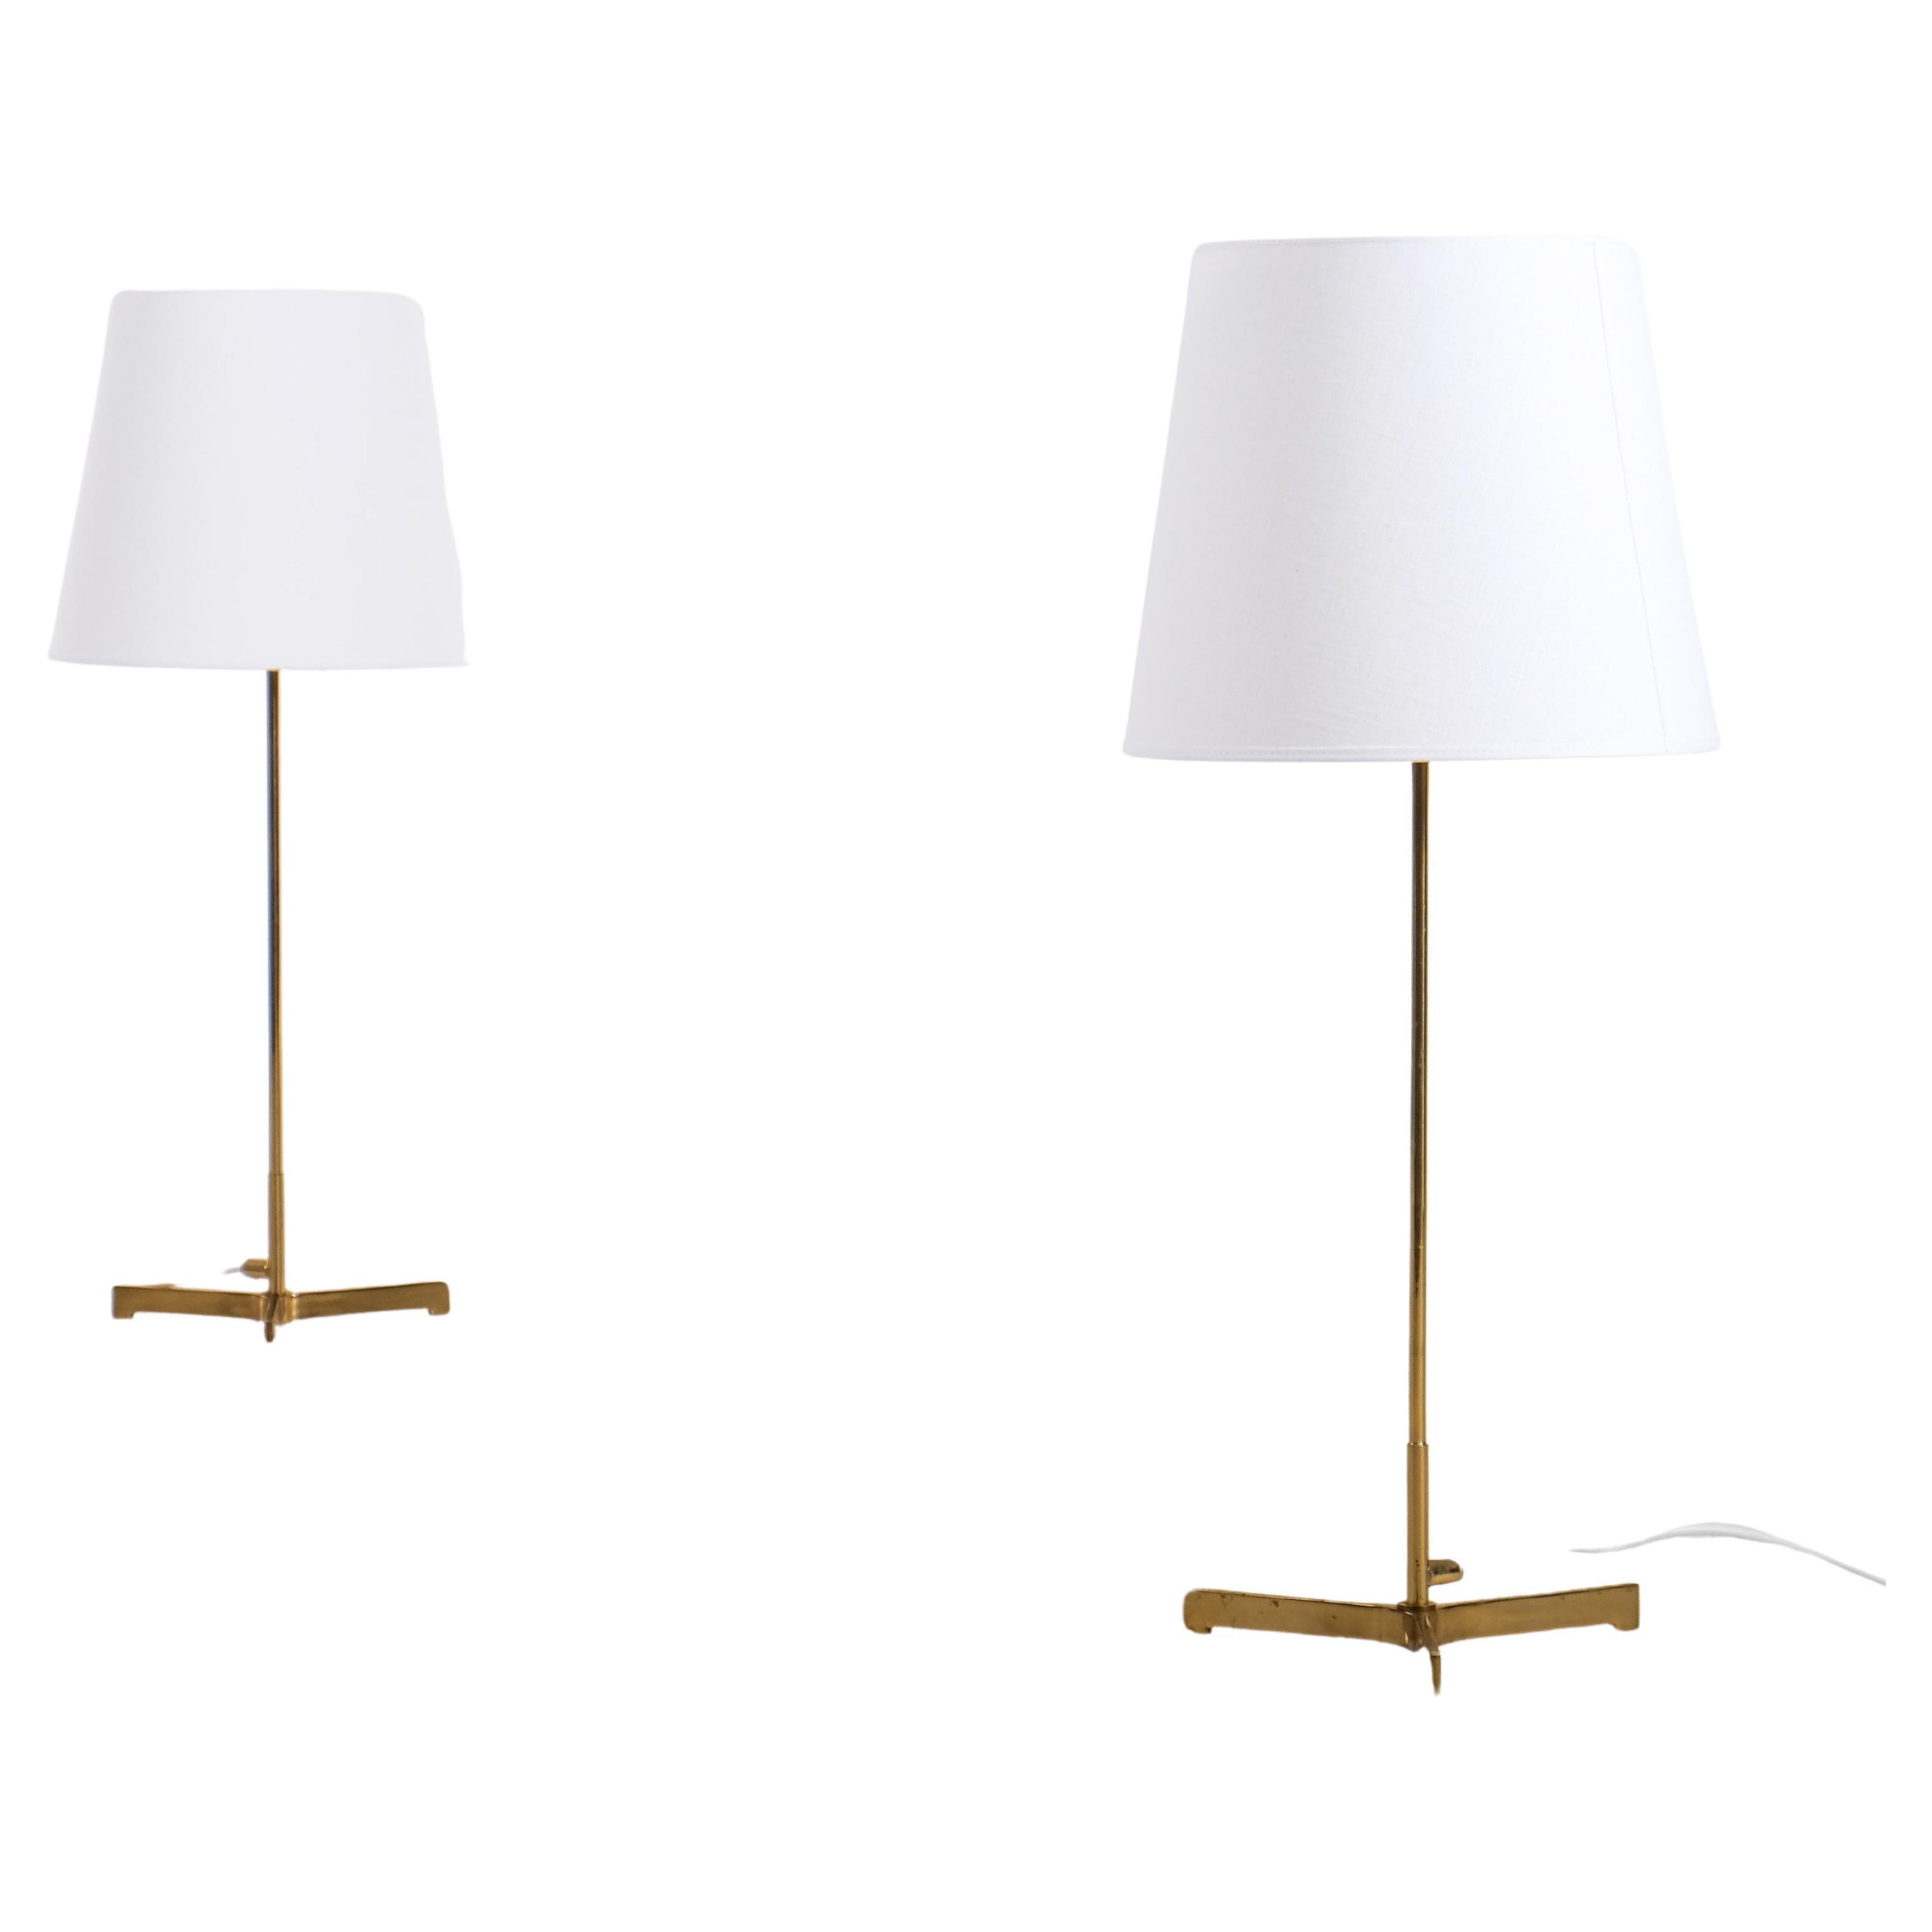 Pair of Hans-Agne Jakobsson Brass Table Lamps, 1960s